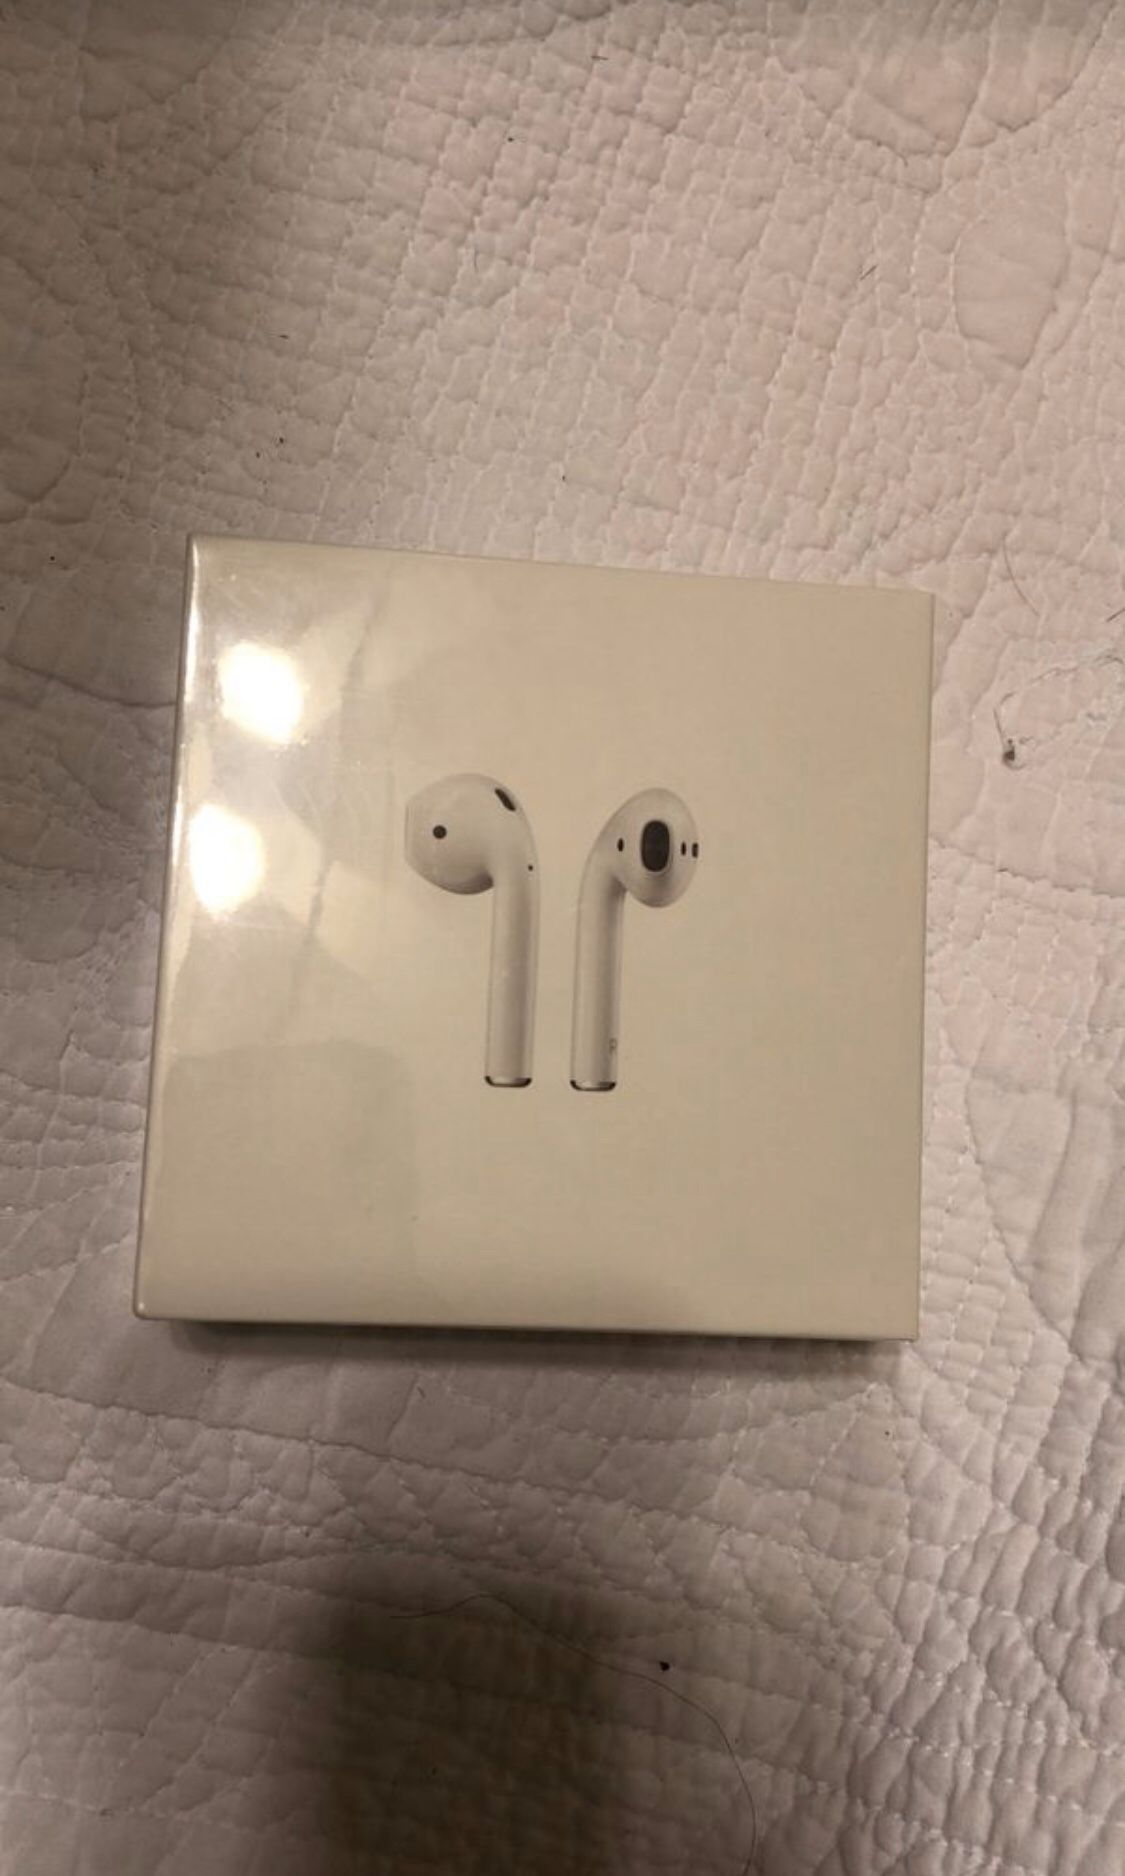 Apple air pods 2nd gen with wireless charging case brand new